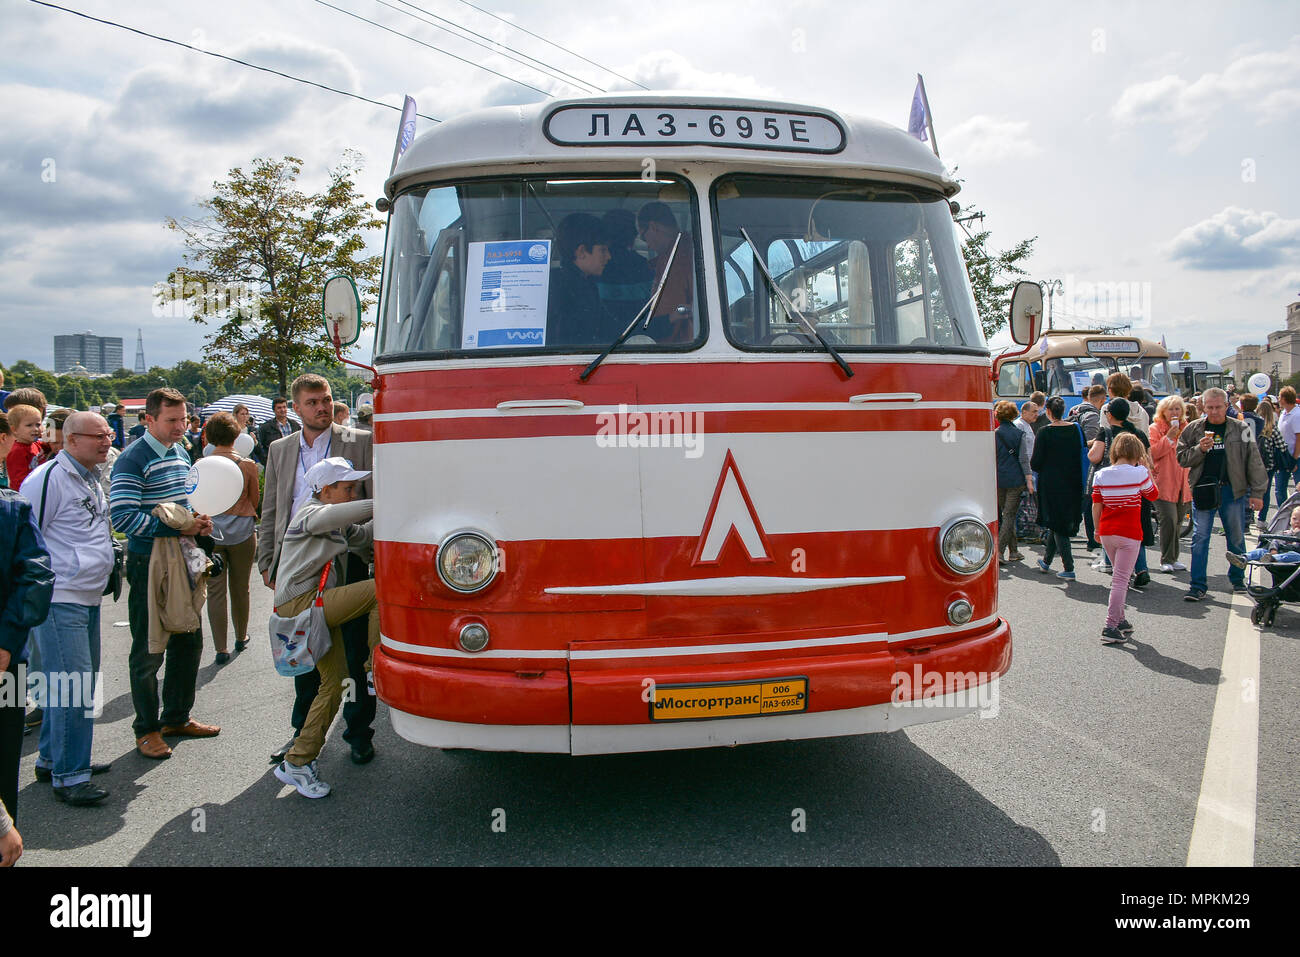 6 foreign-made buses popular in the USSR (PHOTOS) - Russia Beyond